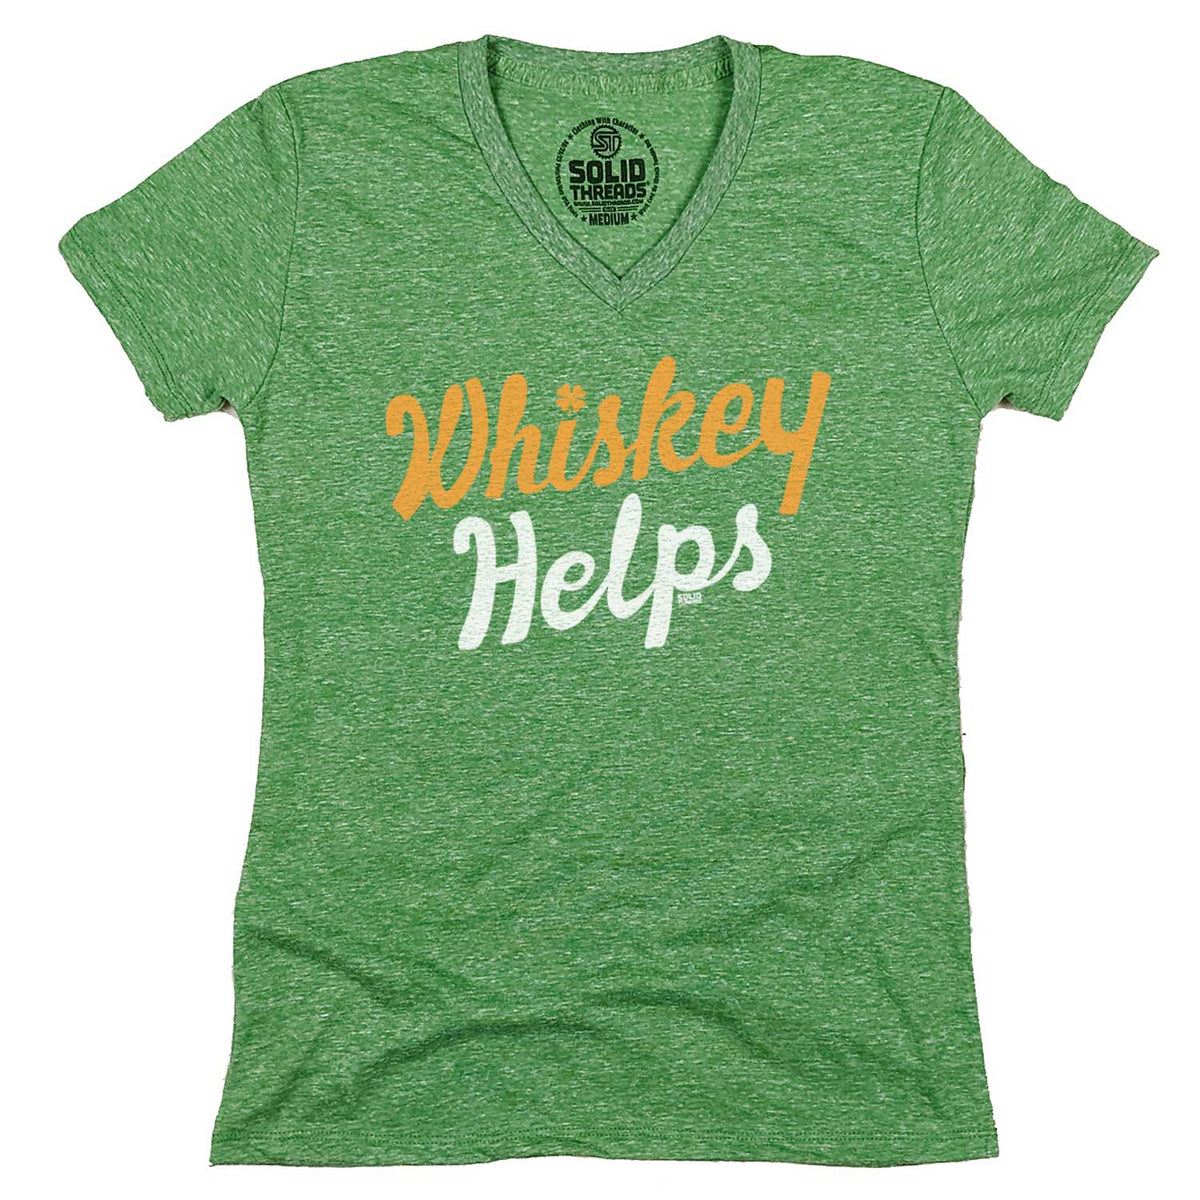 Women&#39;s Irish Whiskey Helps Vintage Graphic V-Neck Tee | Funny St. Paddy&#39;s T-shirt | Solid Threads